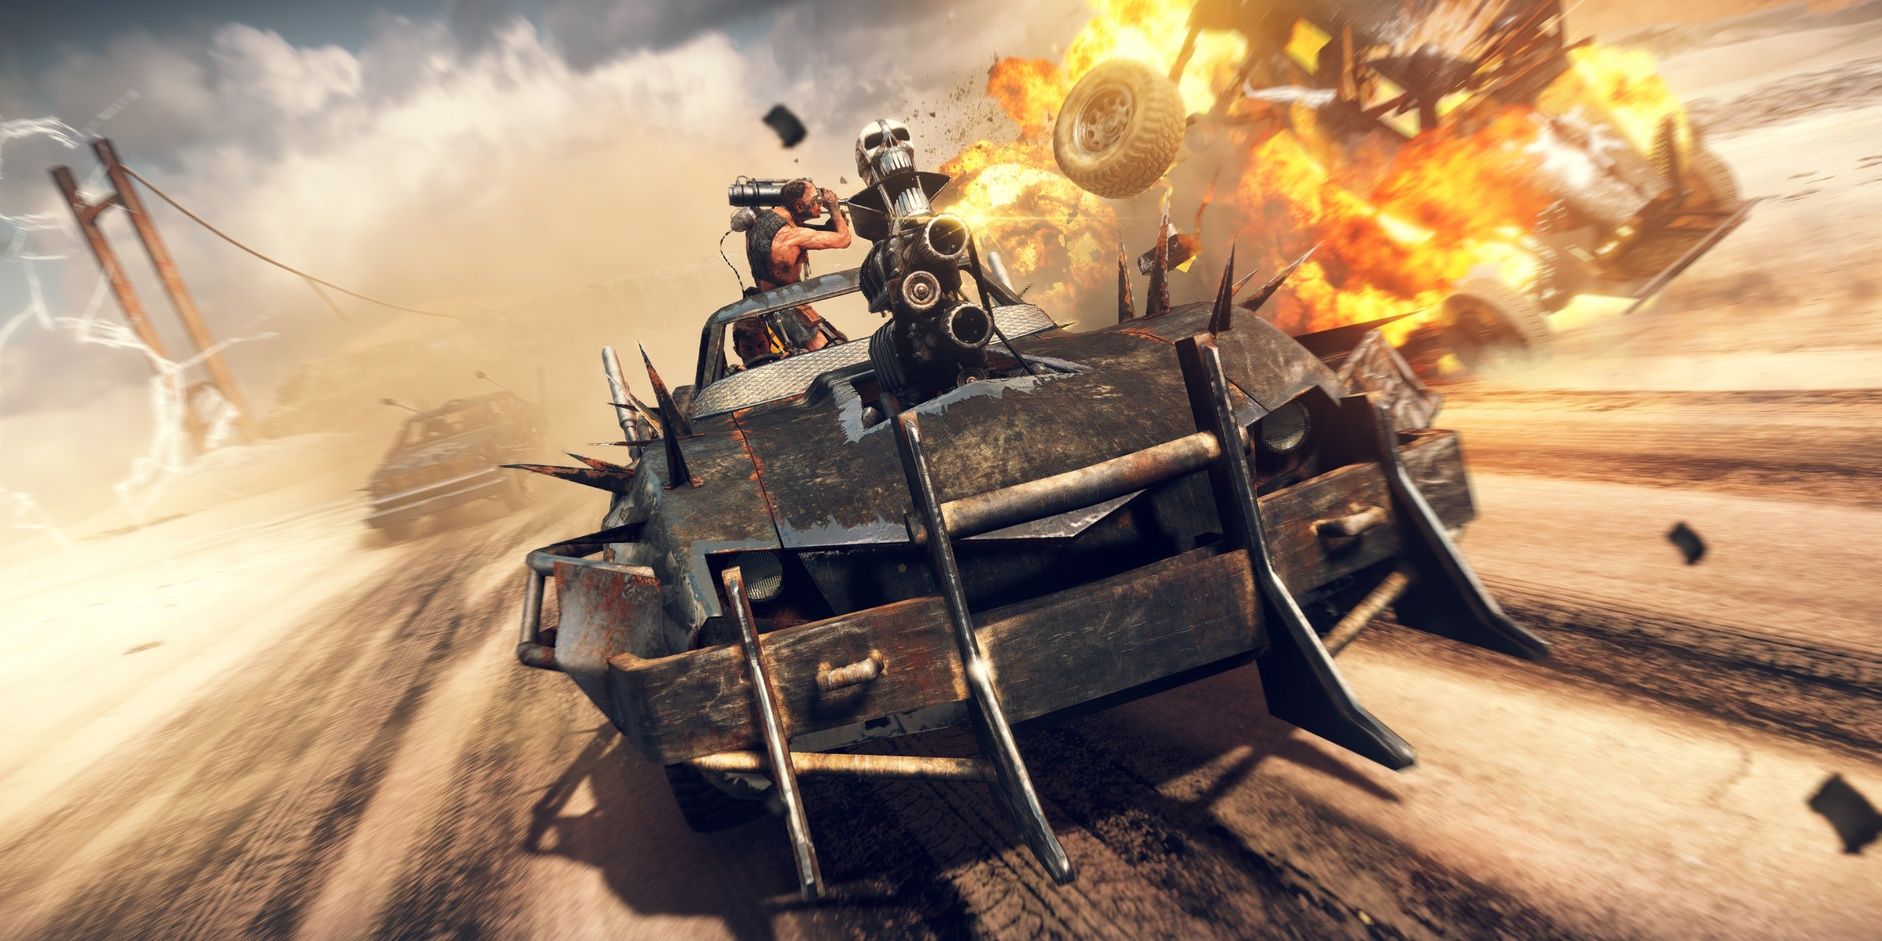 A violent car chase in the Mad Max game